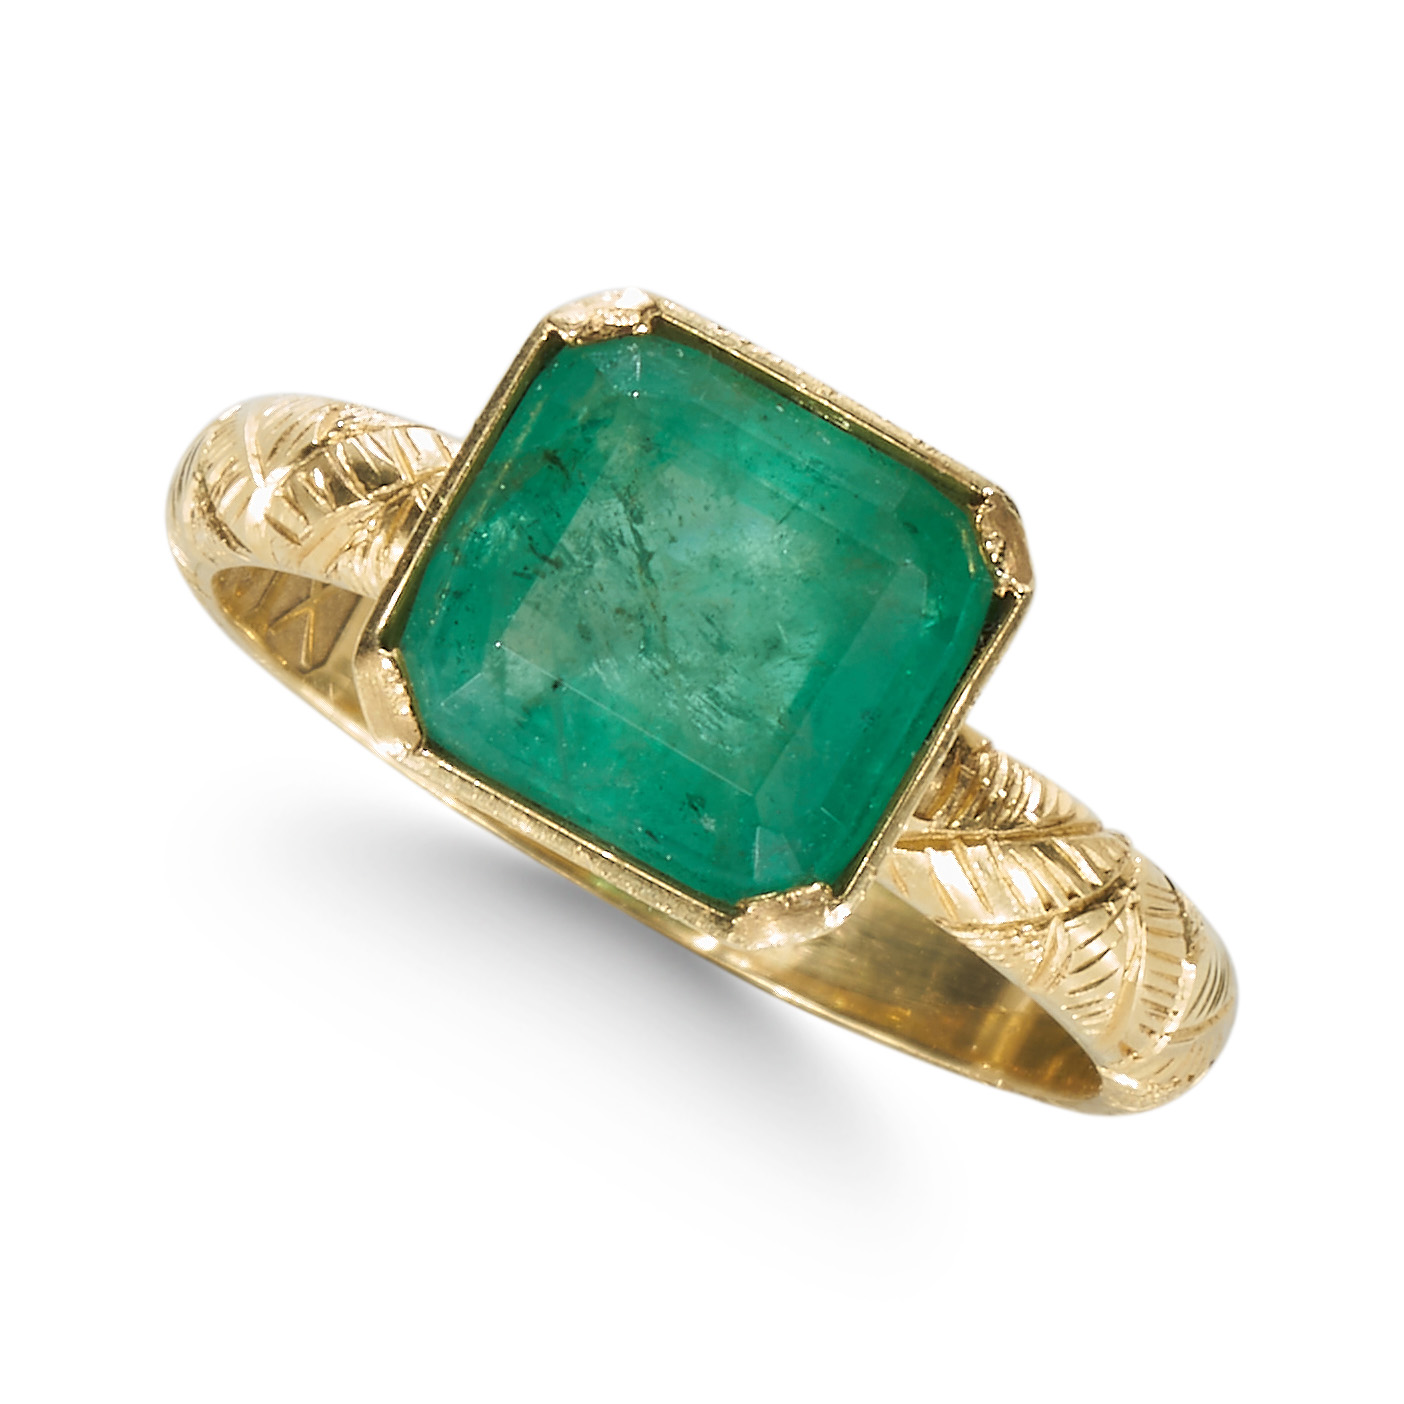 AN EMERALD, SET IN 18CT YELLOW GOLD RING.